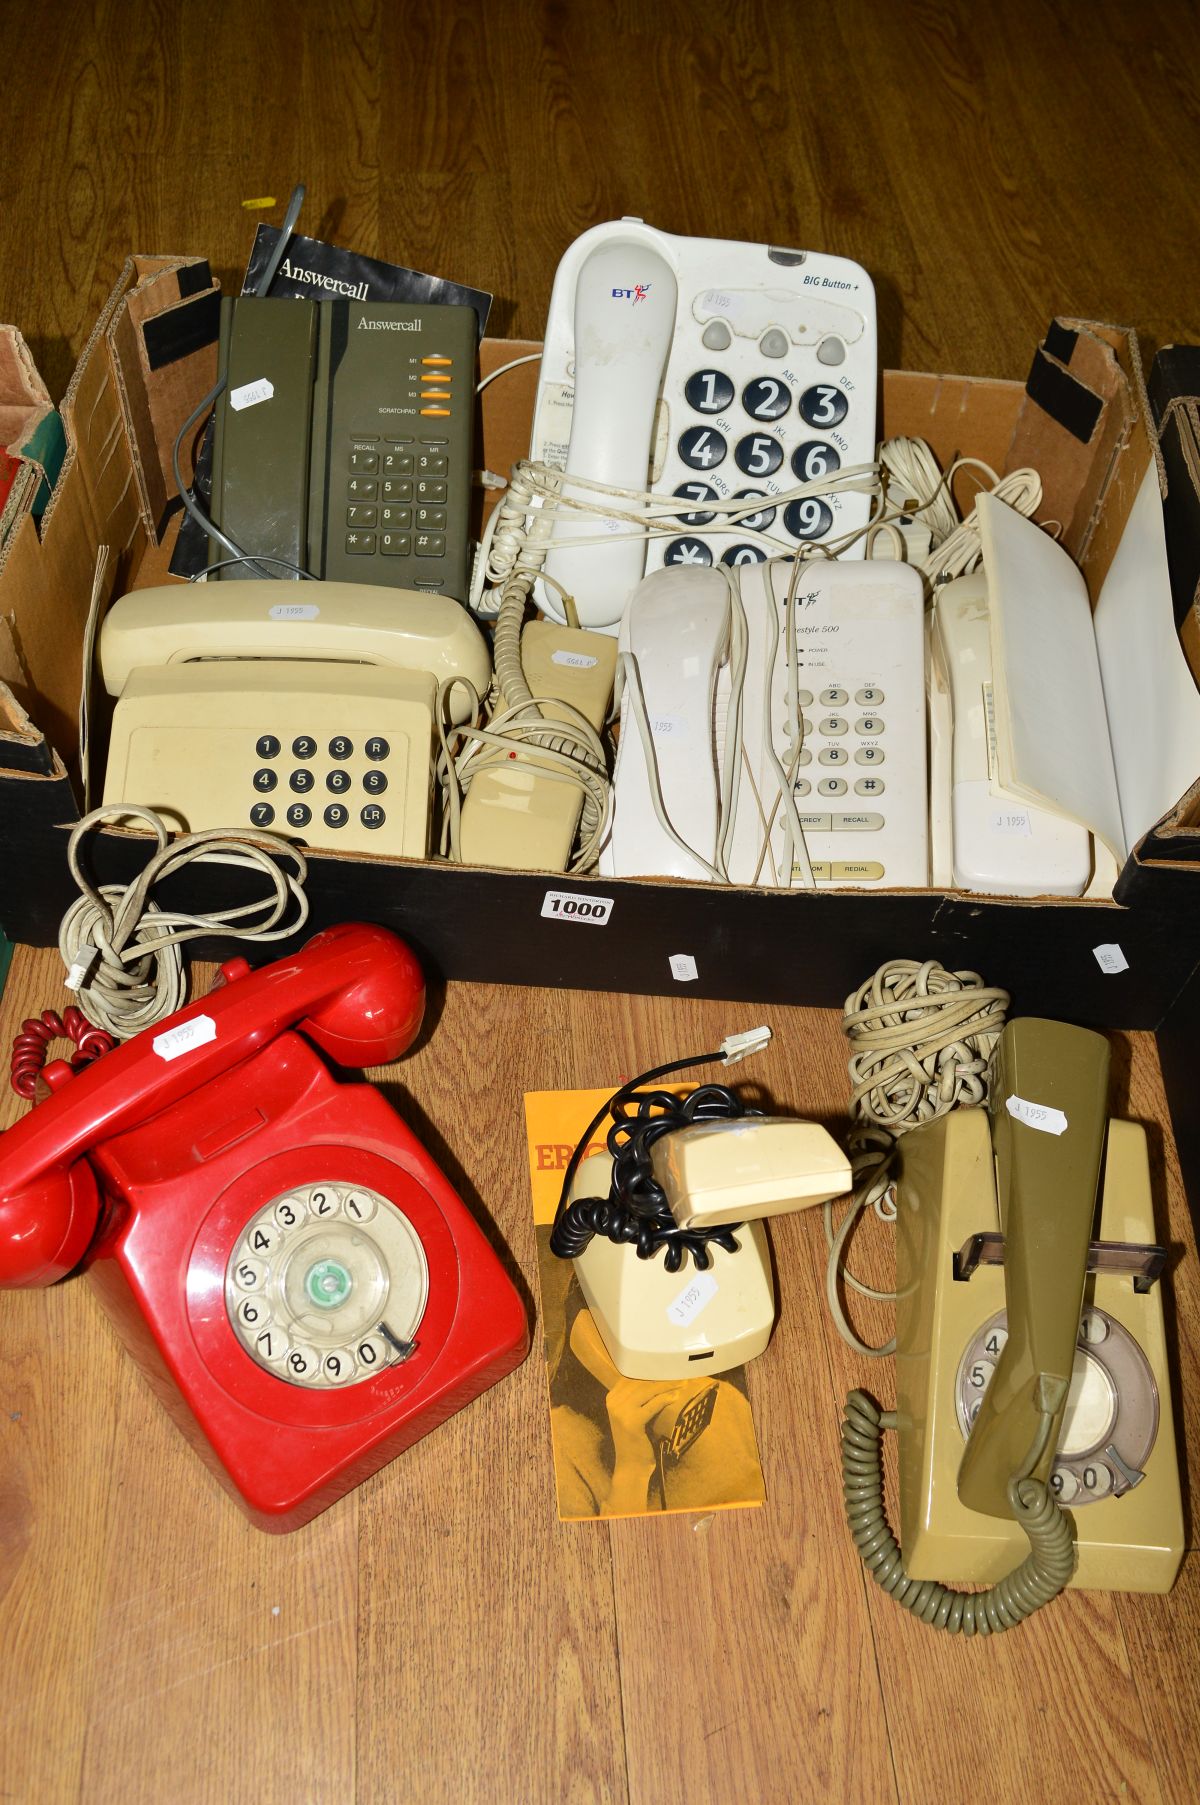 VARIOUS TELEPHONES, to include Ericofon 700 with leaflet, red BT phone, Big button BT phone etc